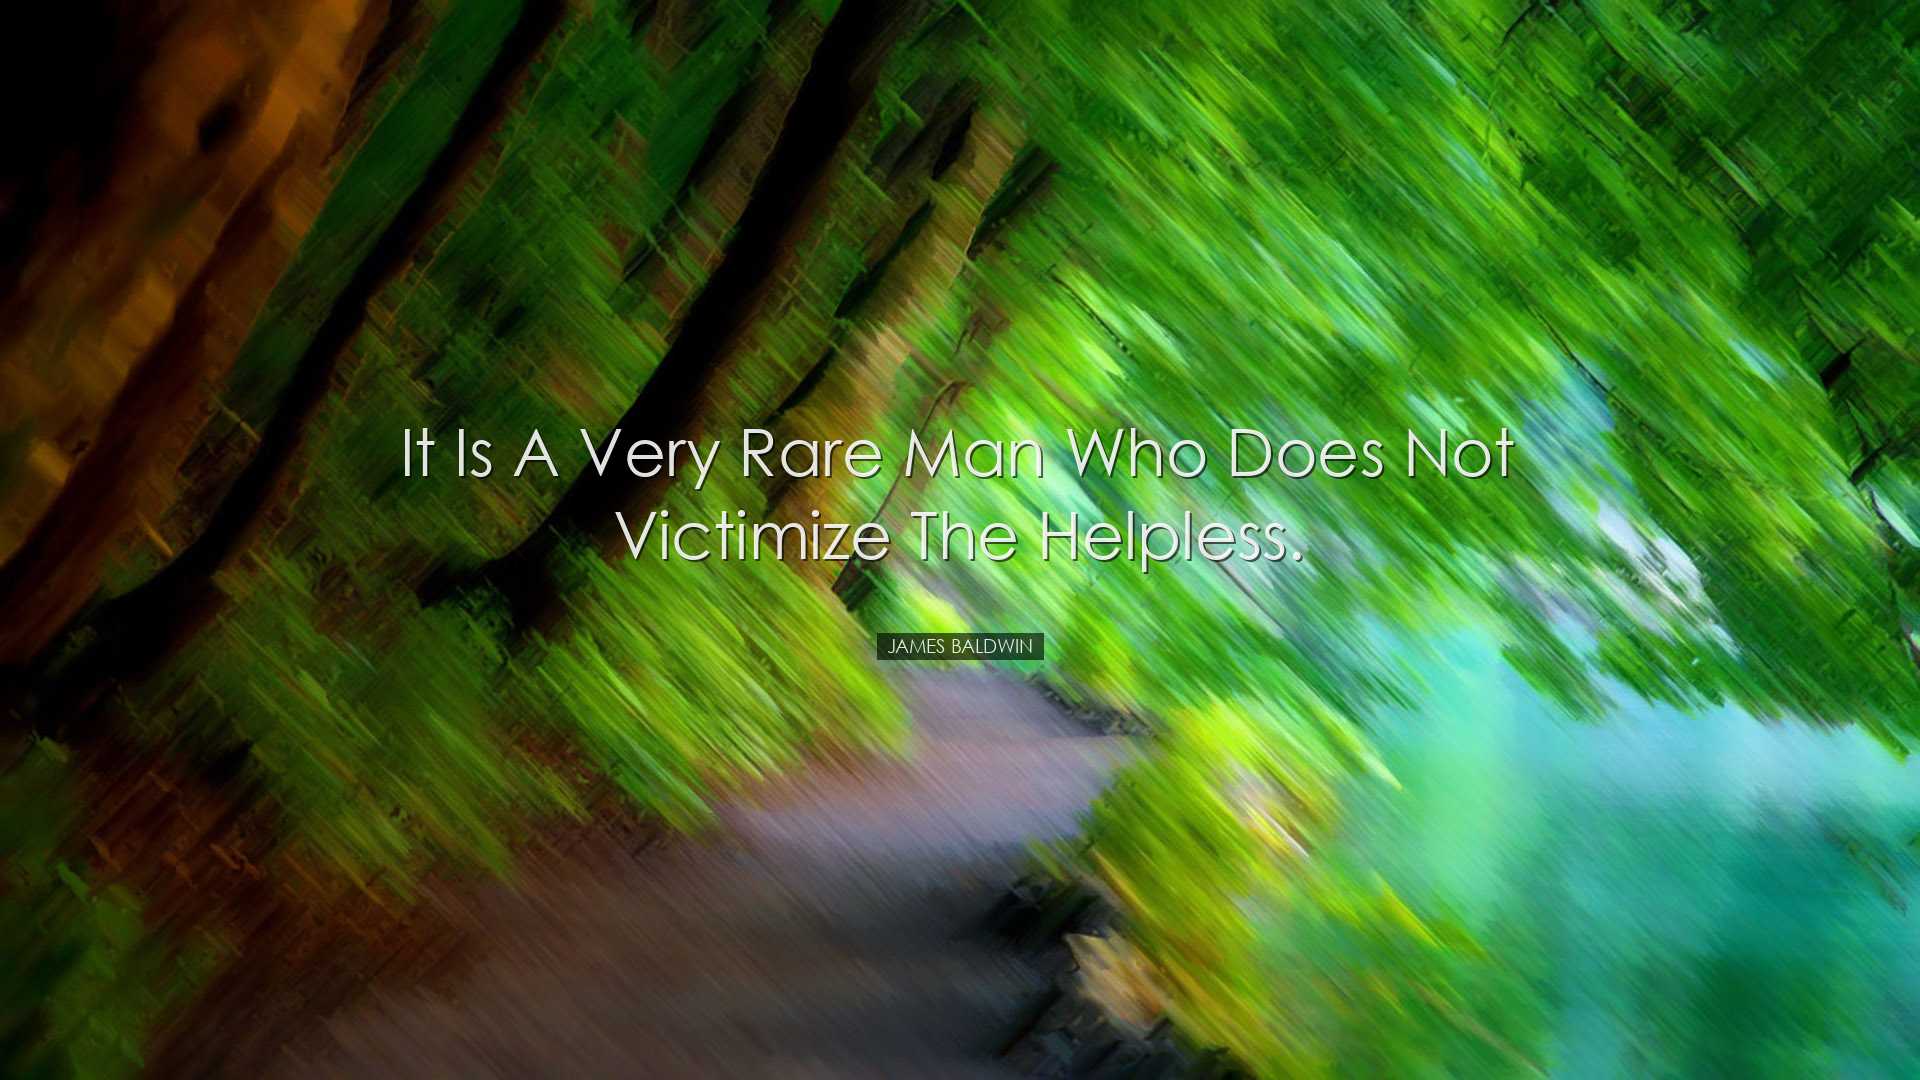 It is a very rare man who does not victimize the helpless. - James